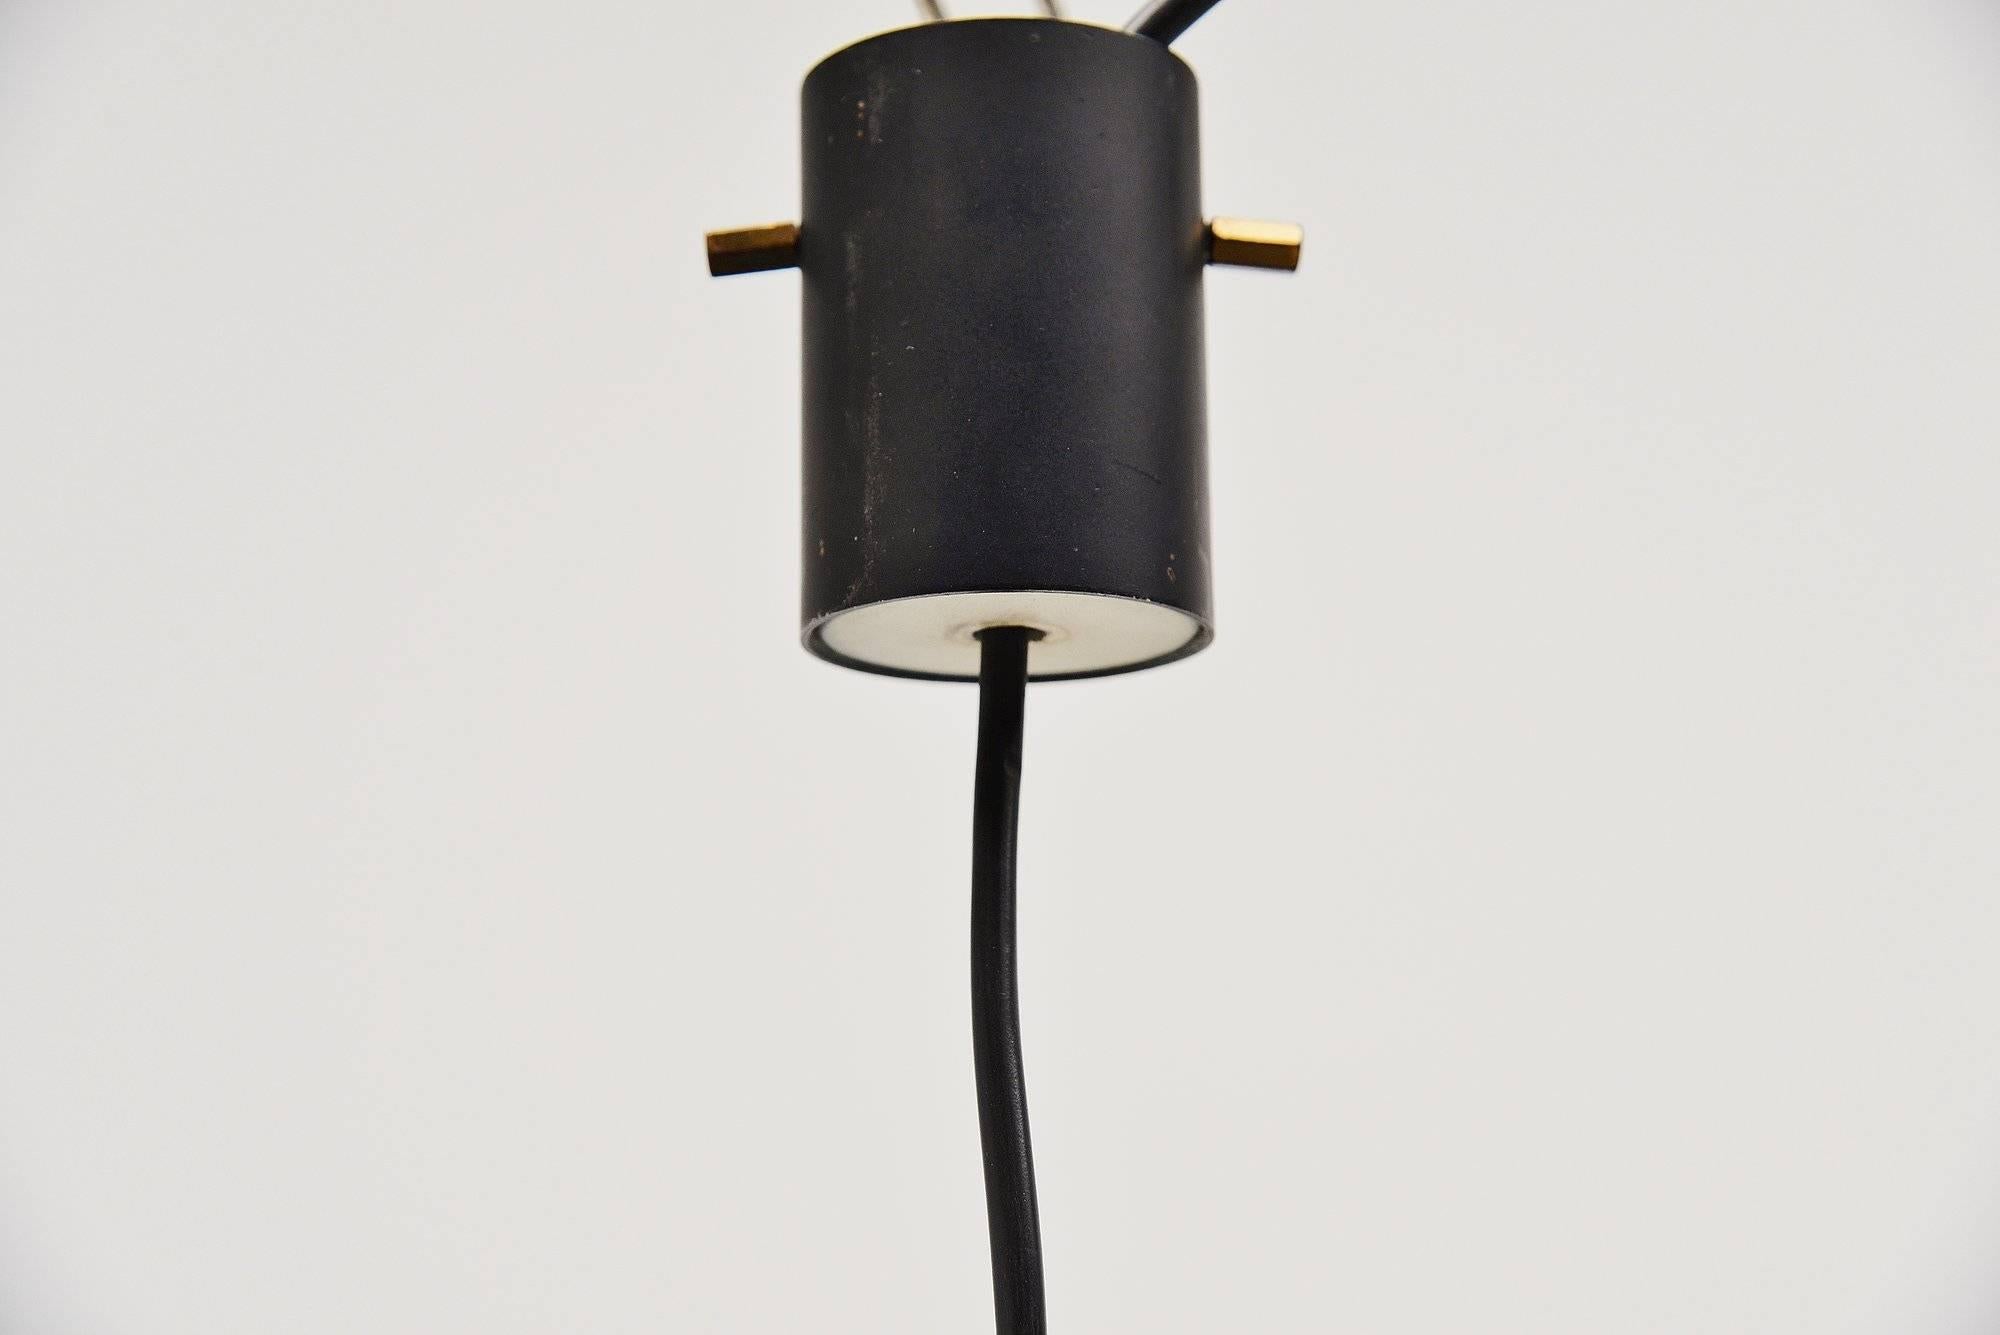 Nice pendant lamp model 1135 designed and made by Stilnovo, Italy 1960. This is for a very nice modernist shaped pendant lamp with a yellow lacquered metal shade holder, and a large white opaline glass diffuser shade. The lamp has a funny plexi